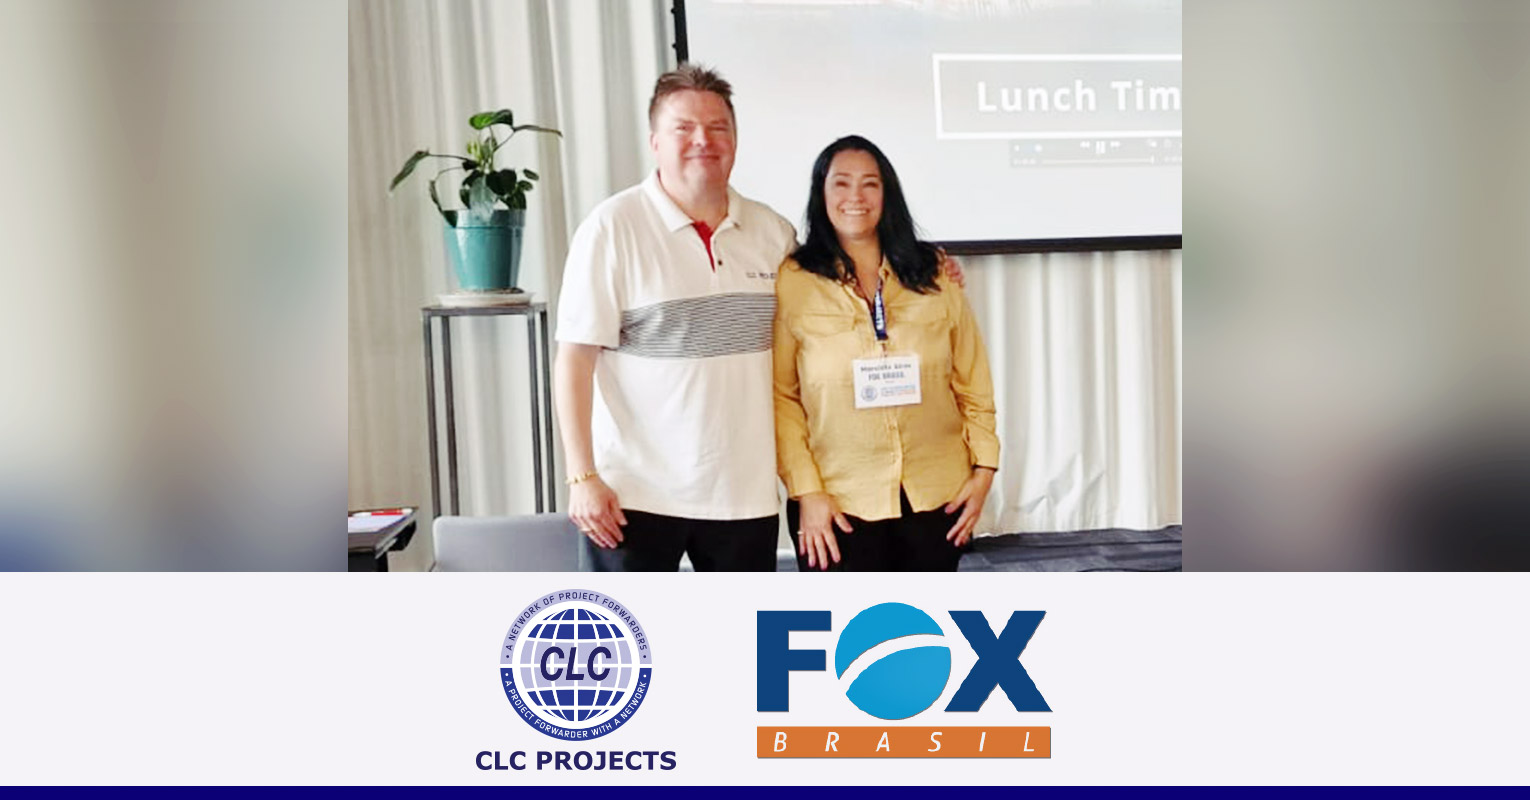 Marciete Eiras of FOX Brasil | Project Logistics and CLC Projects Chairman at joint network meeting in Rotterdam